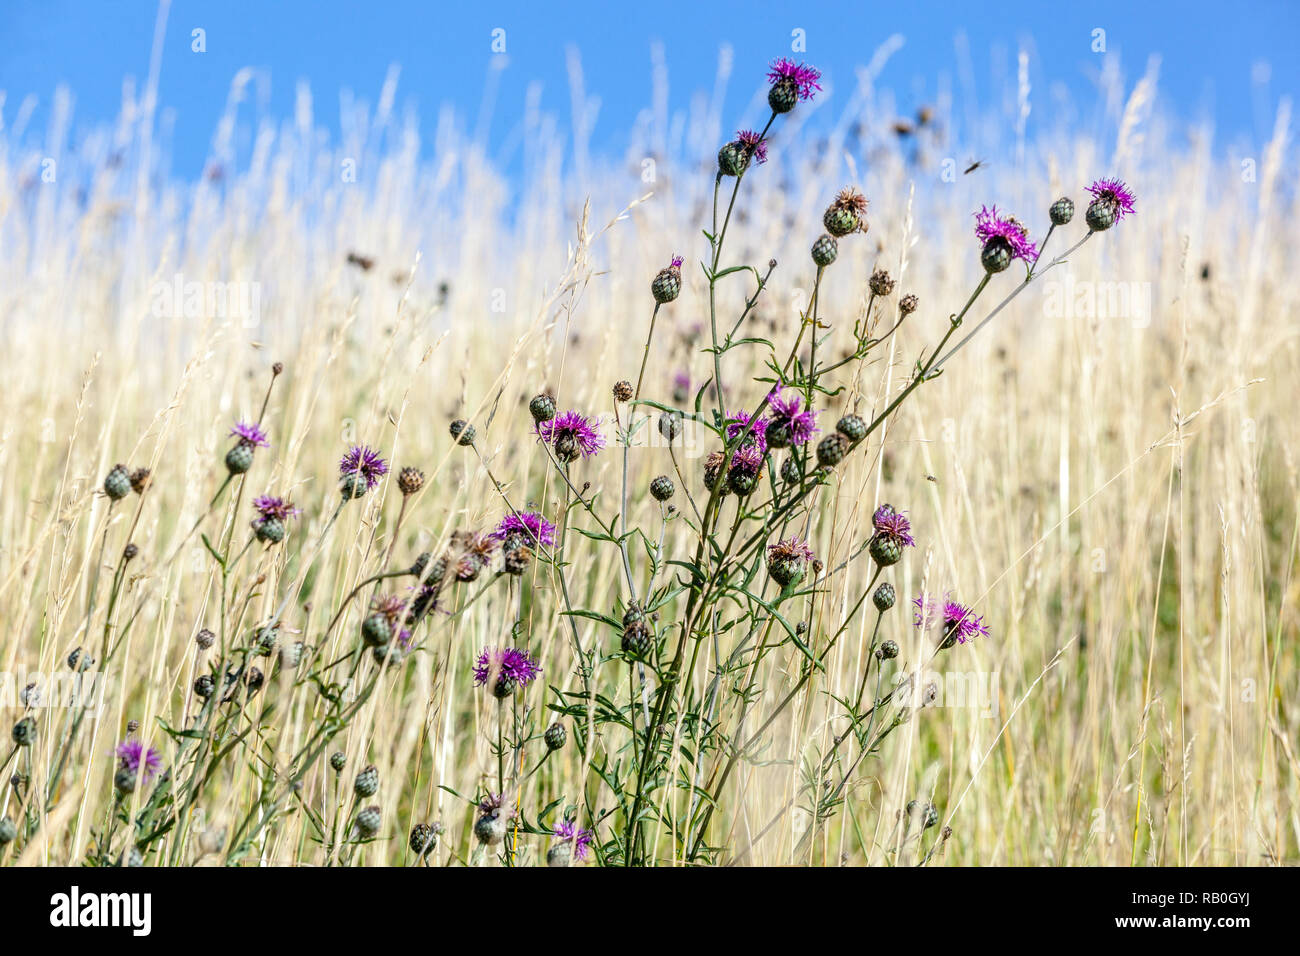 Meadow flowers grasses thistle Stock Photo